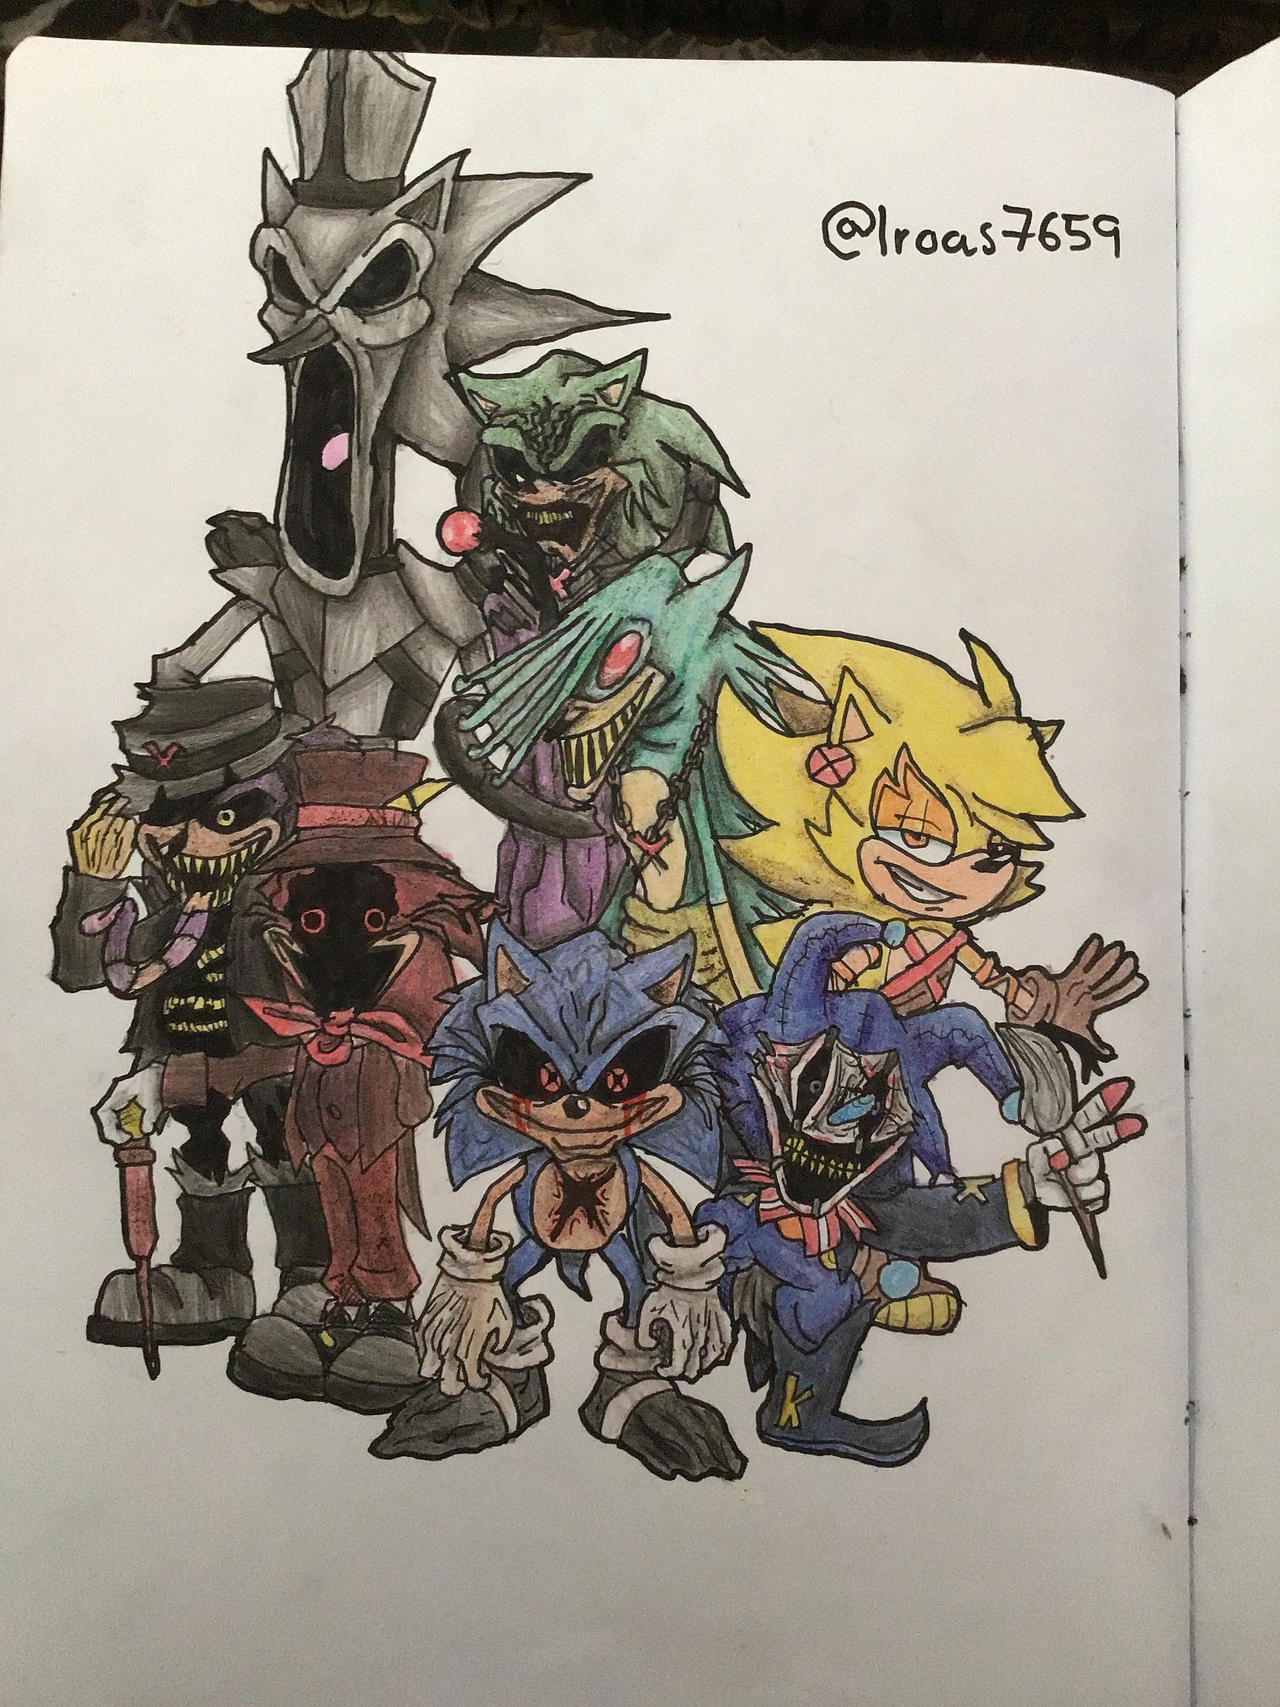 Lord X and his guardians by Iroas7659 on DeviantArt